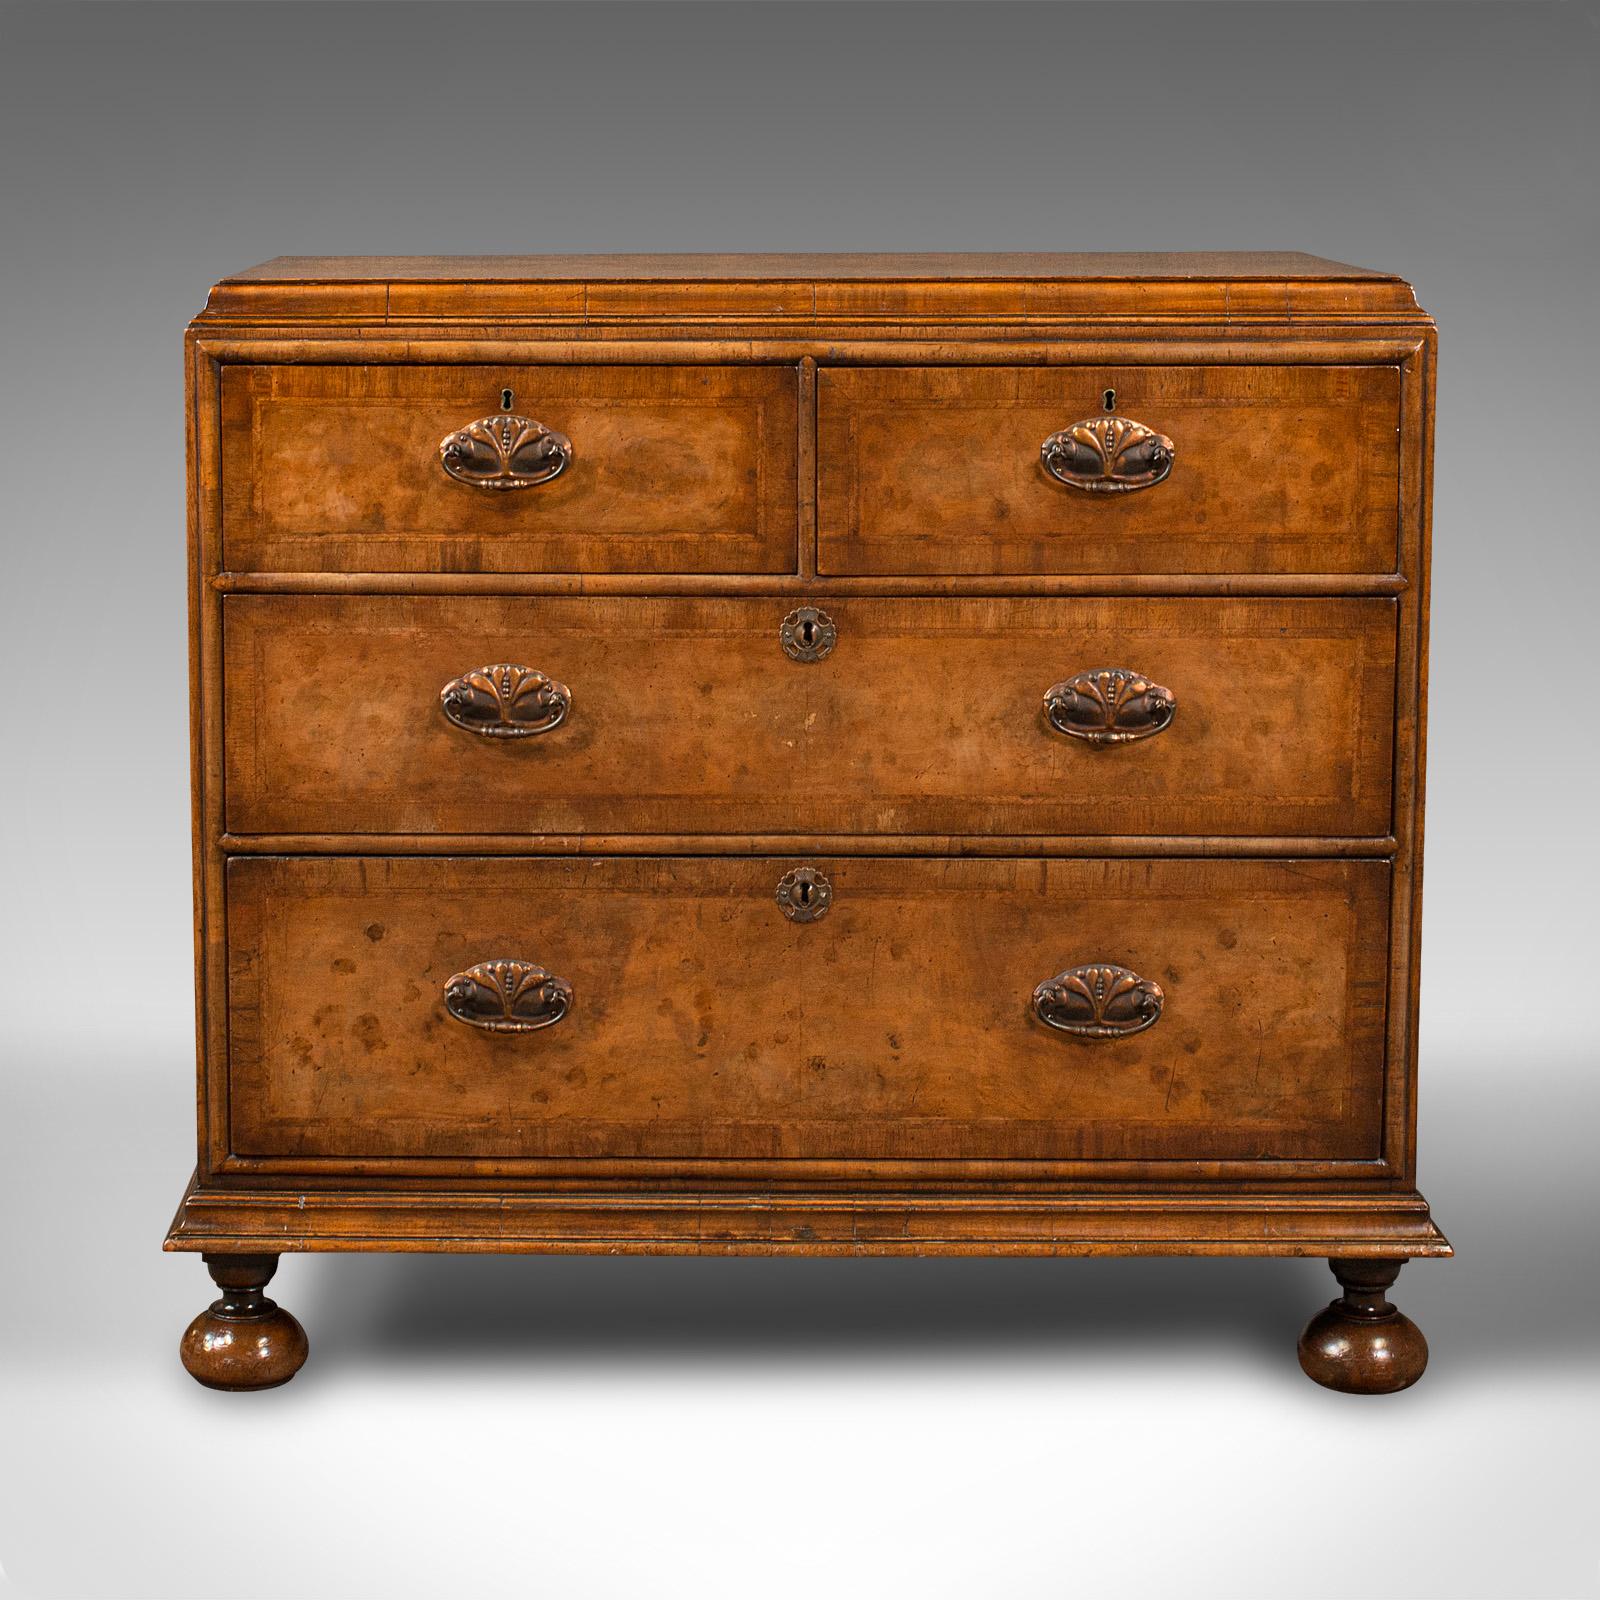 This is an antique chest of drawers. An English, walnut bedroom cabinet with Georgian Revival taste, dating to the late Victorian period, circa 1900. 

Appealing example of Georgian revival bedroom furniture.
Displays a desirable aged patina and